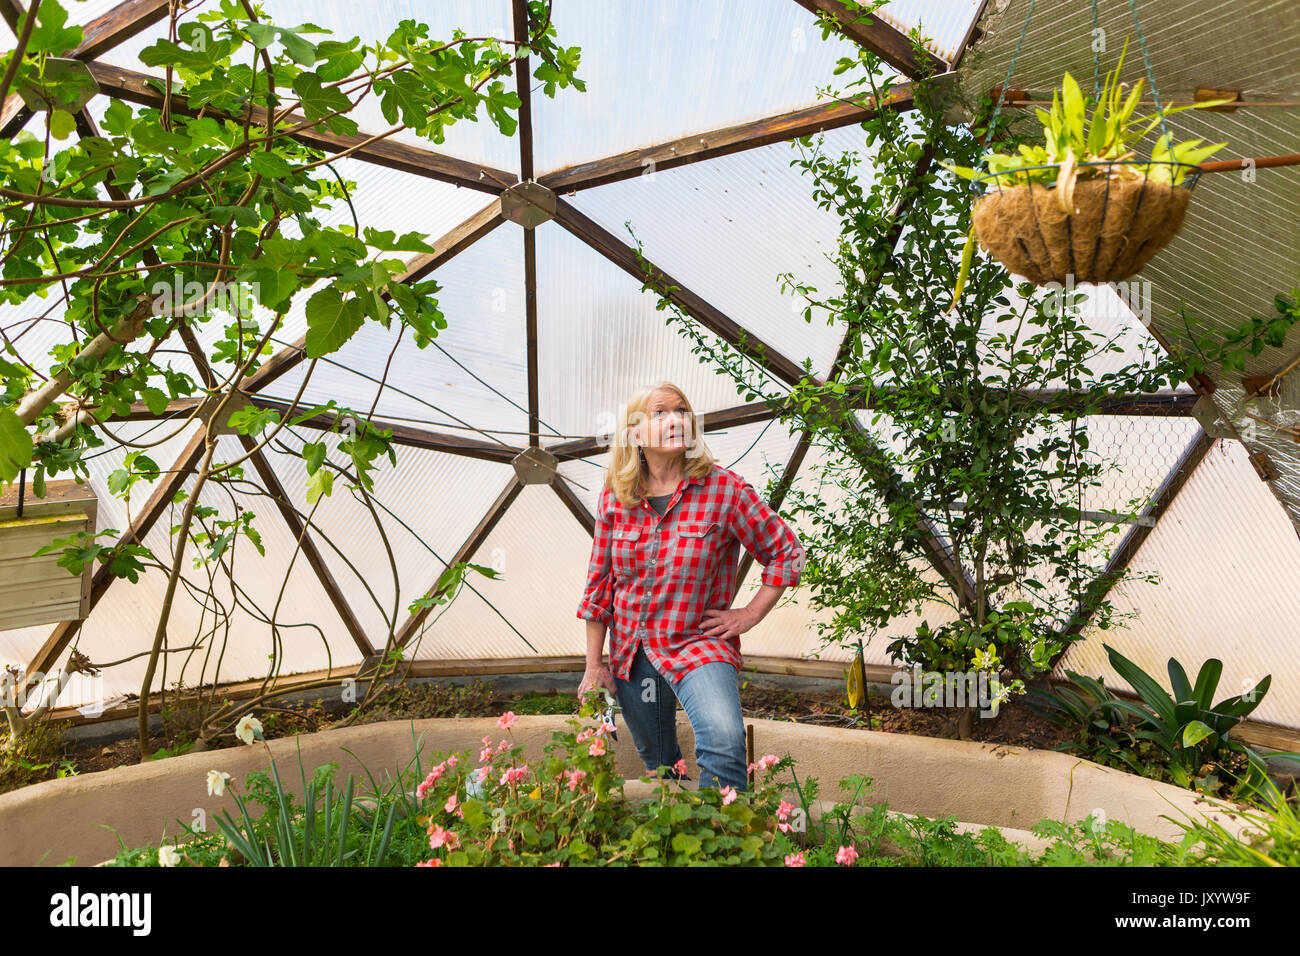 Caucasian woman looking up at hanging plant in greenhouse Stock Photo